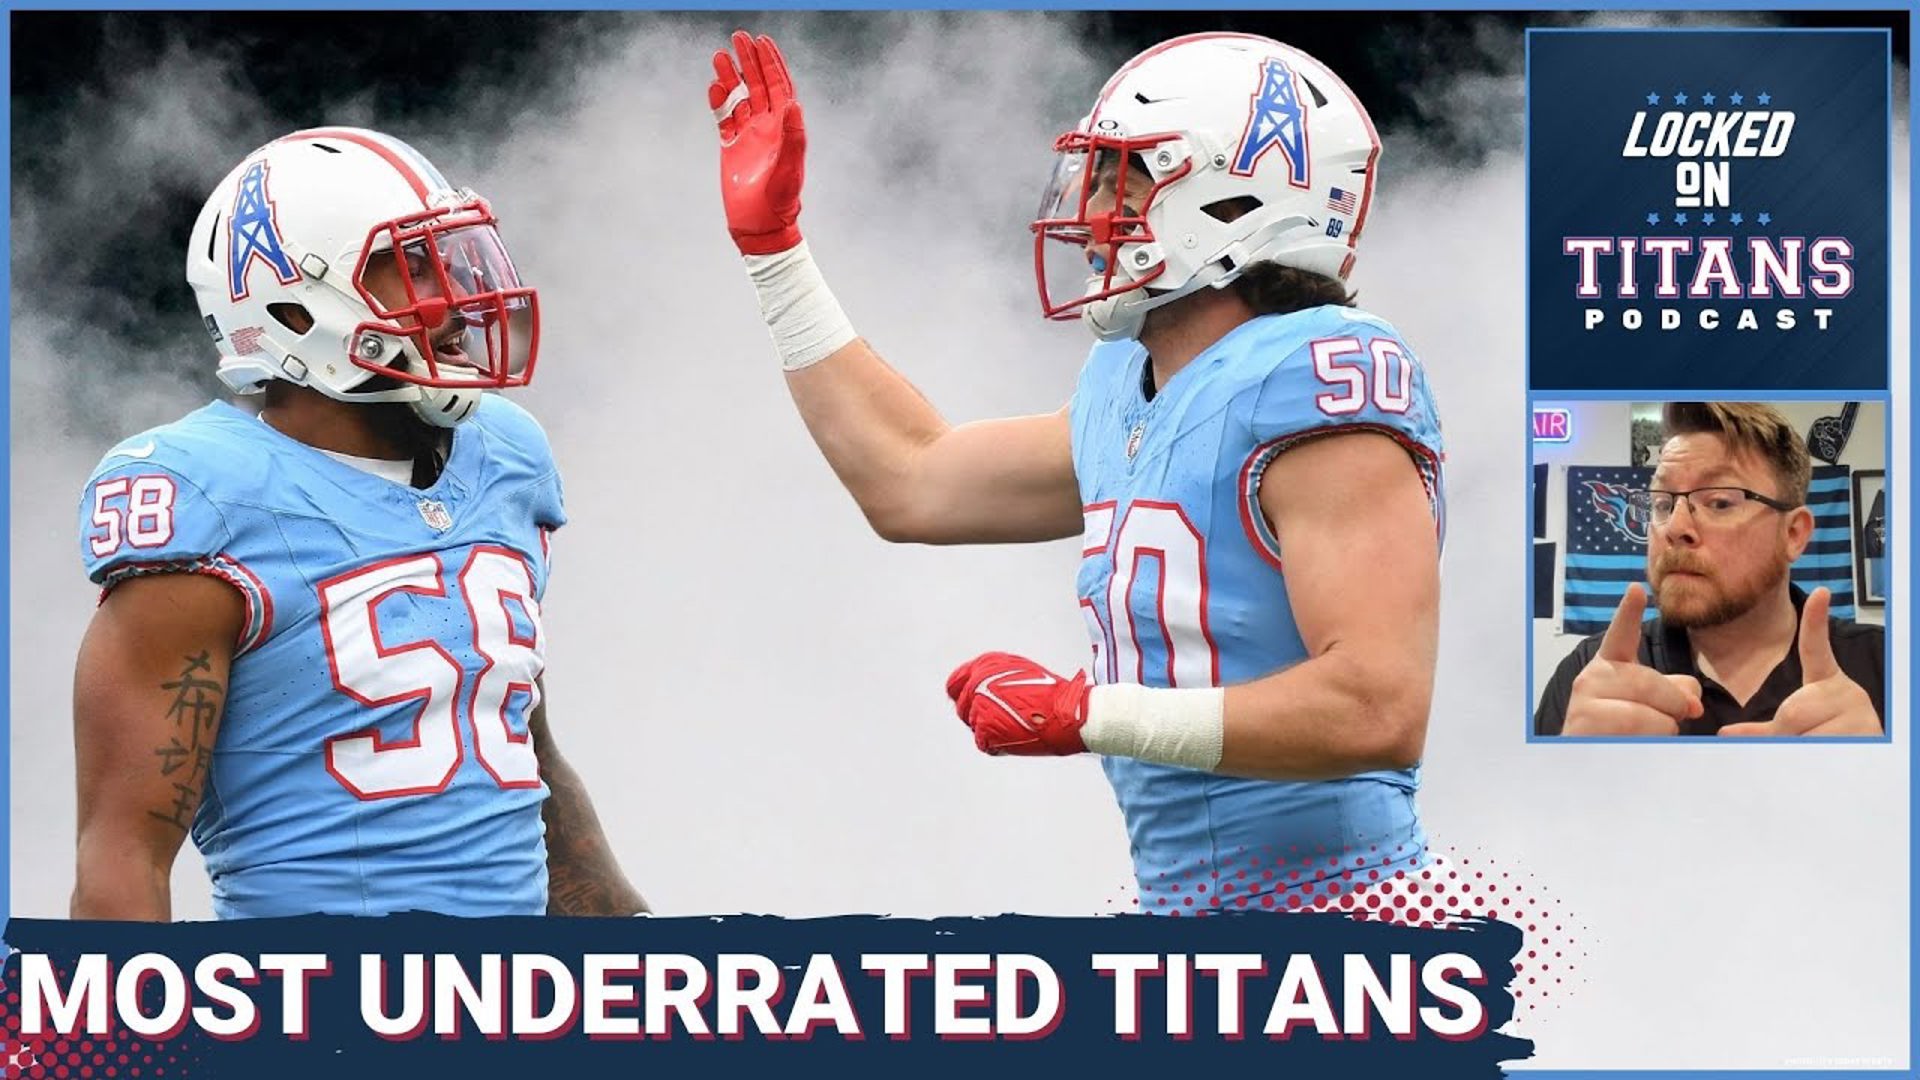 The Tennessee Titans have stars on the team, but who are the most underrated players on the squad?